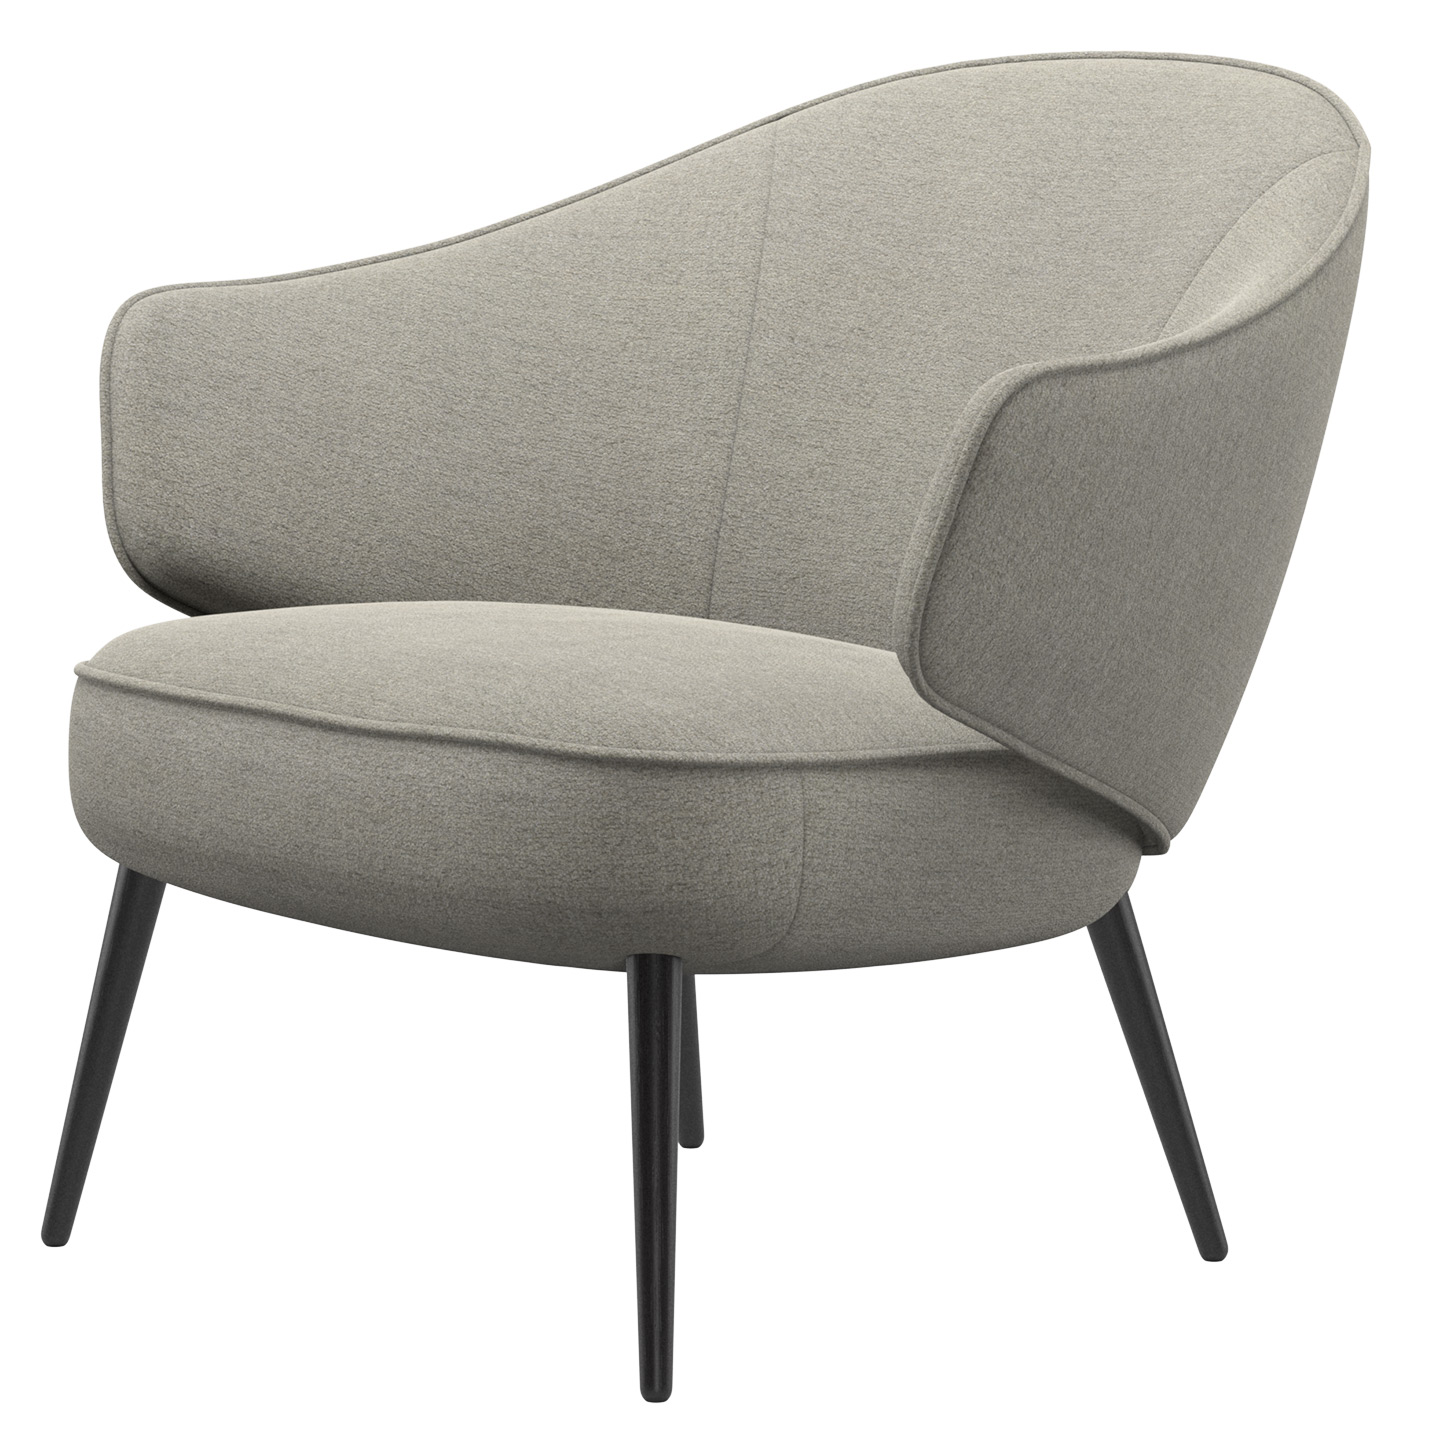 Charlotte armchair from BoConcept